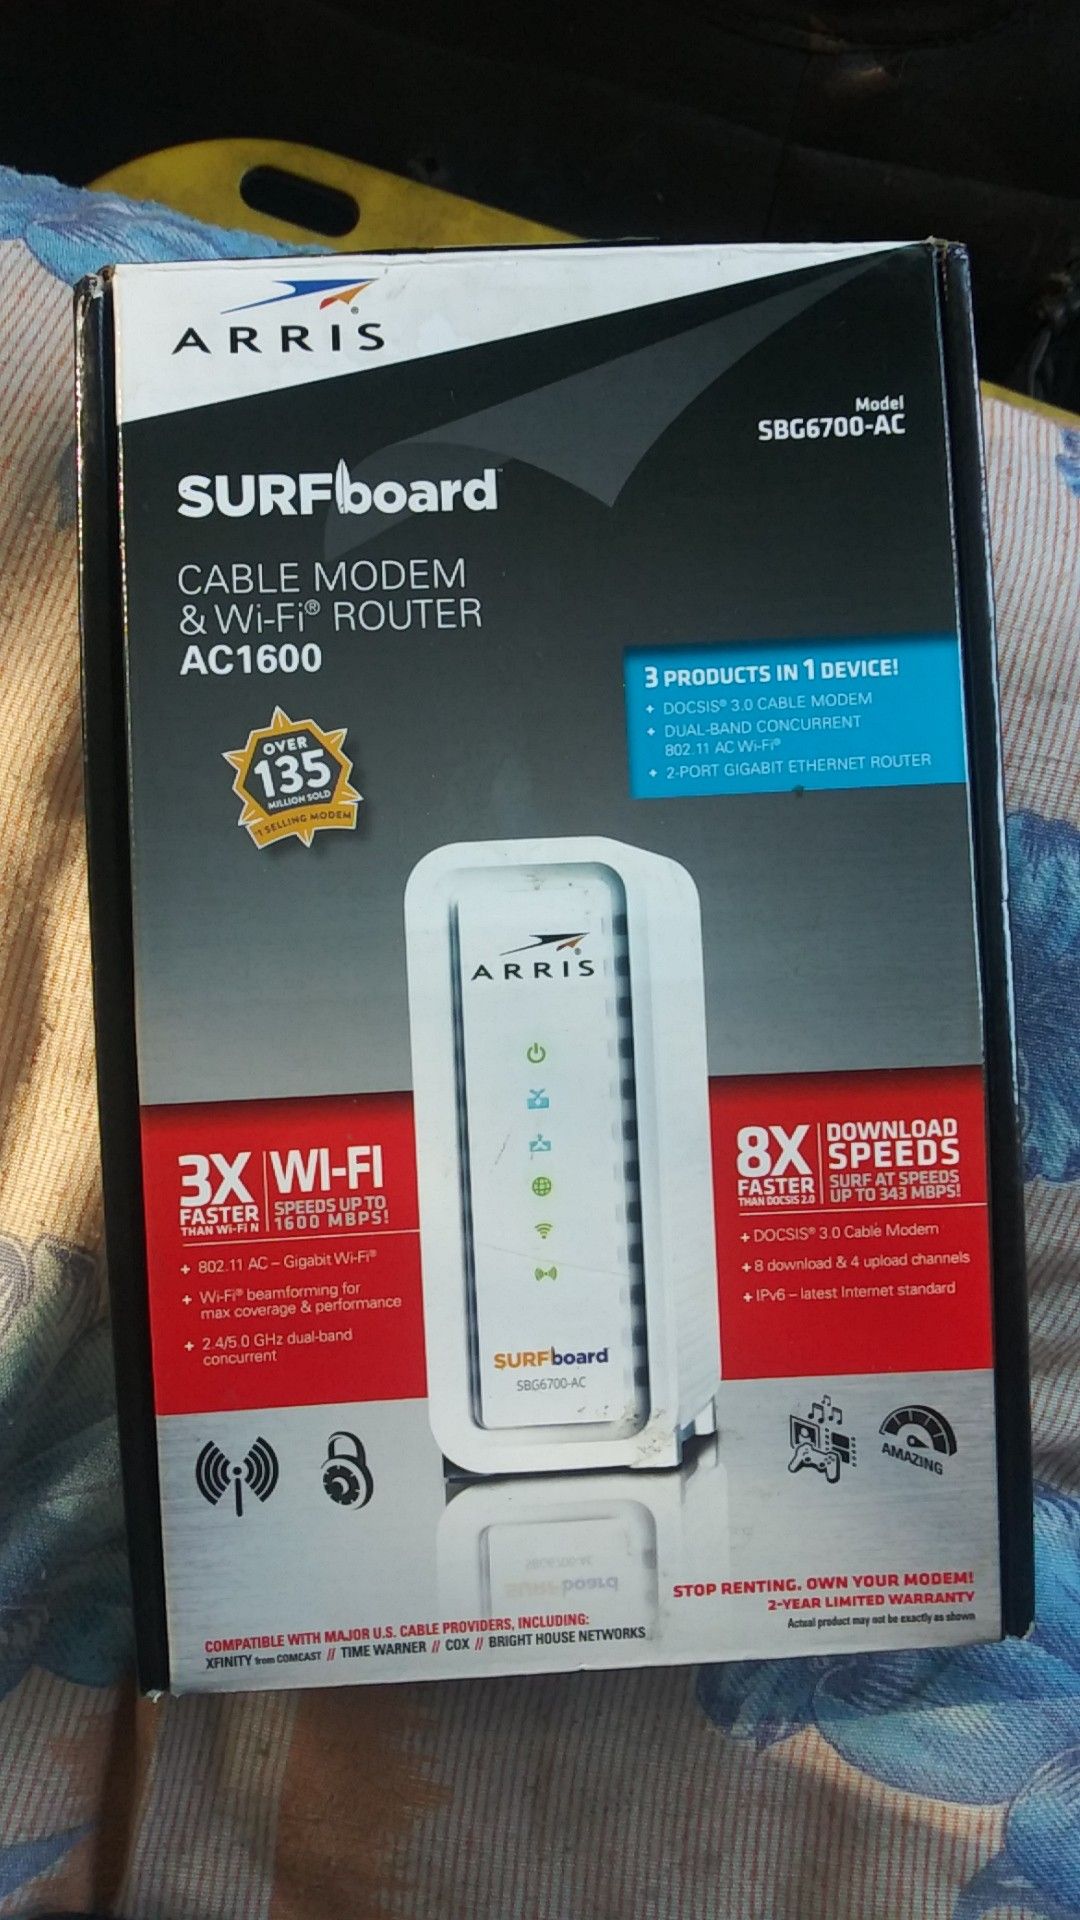 Arris surfboard cable modem and Wi-Fi router